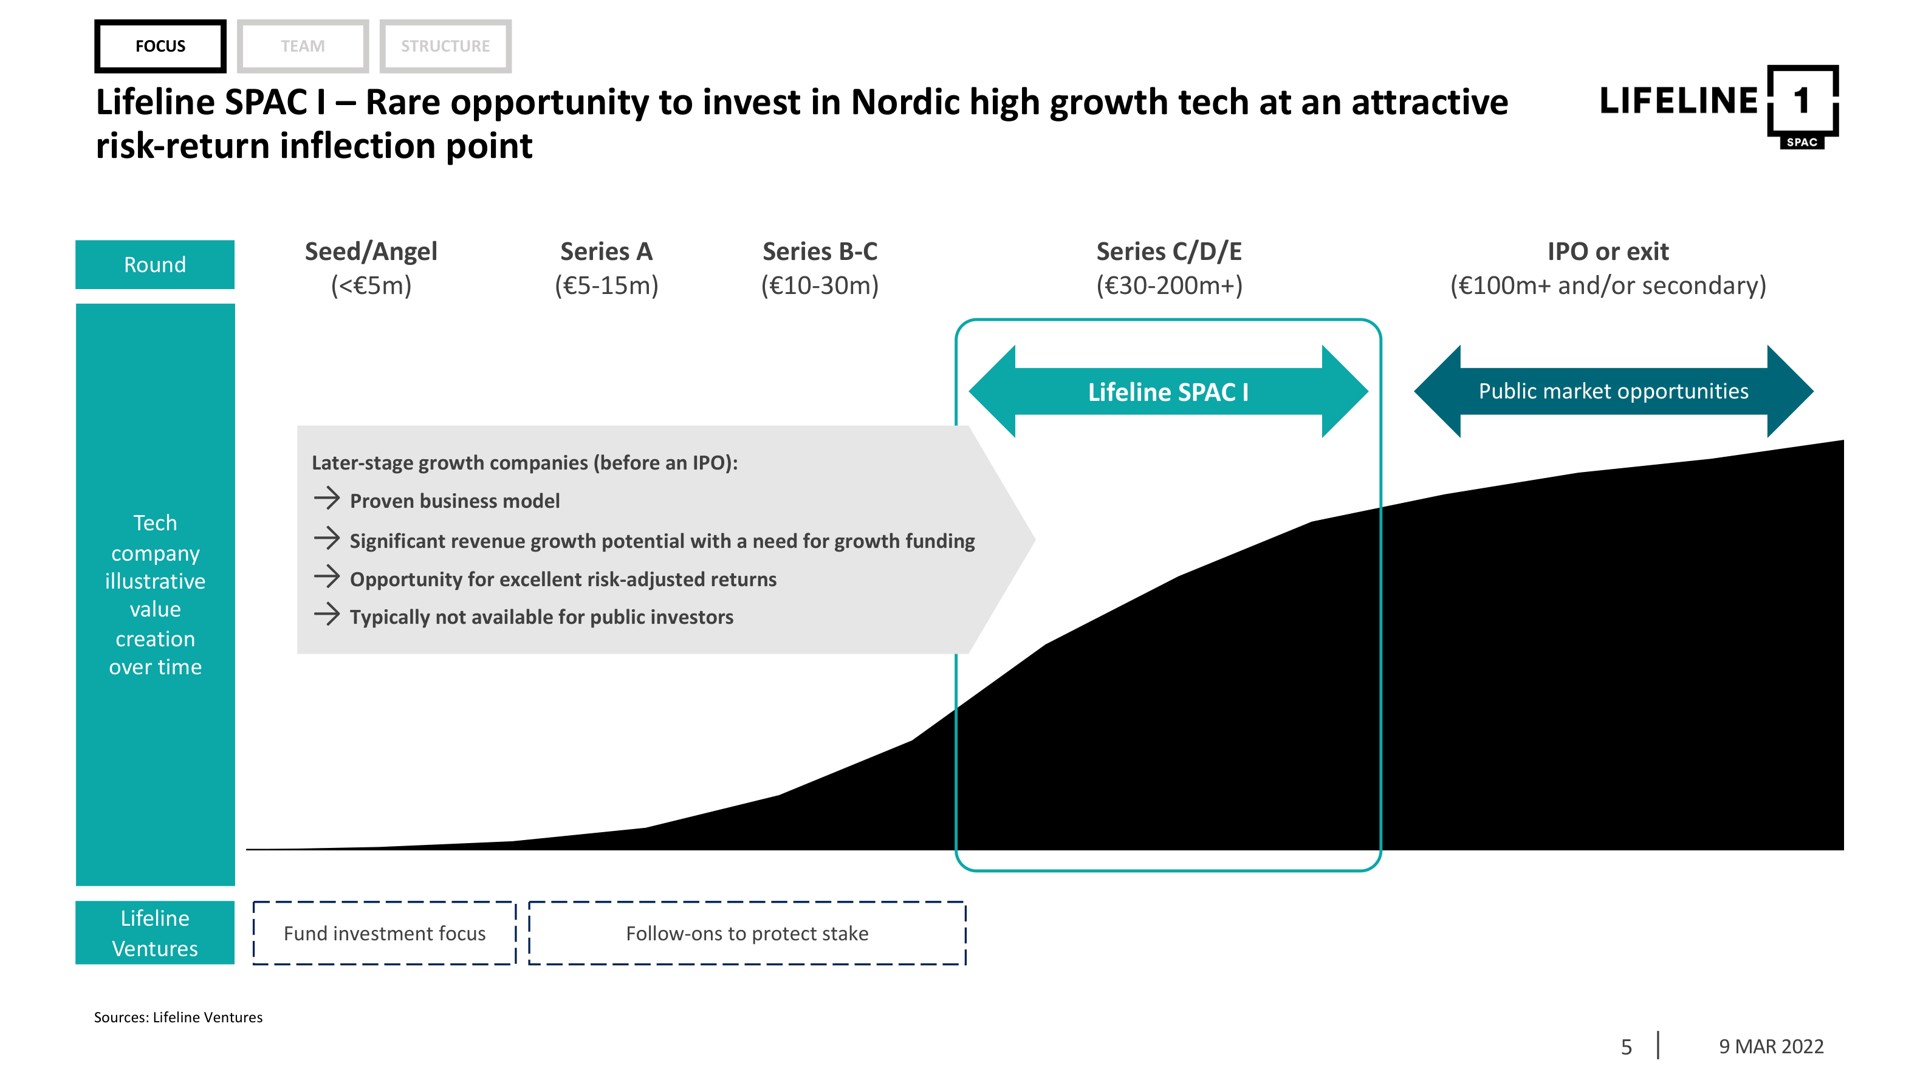 lifeline i rare opportunity to invest in high growth tech at an attractive risk return inflection point | Lifeline SPAC 1